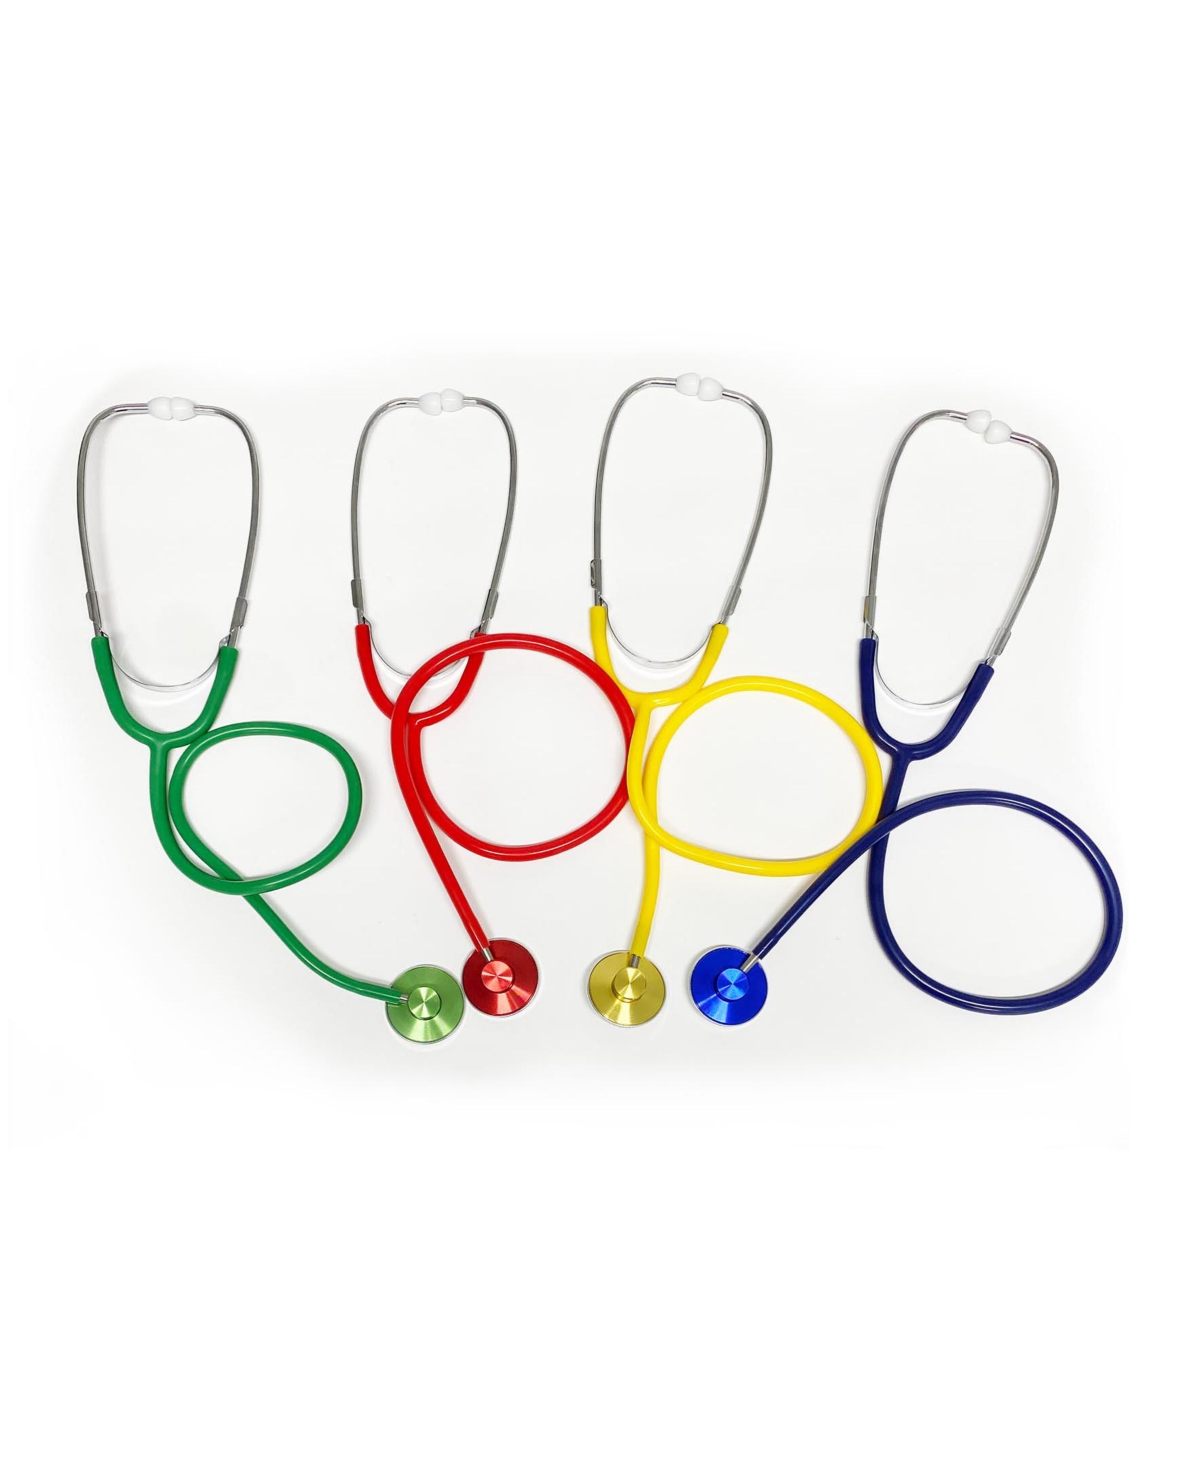 Supertek Stethoscopes, Assorted Colors Set, 4 Piece In Yellow,red,blue,green